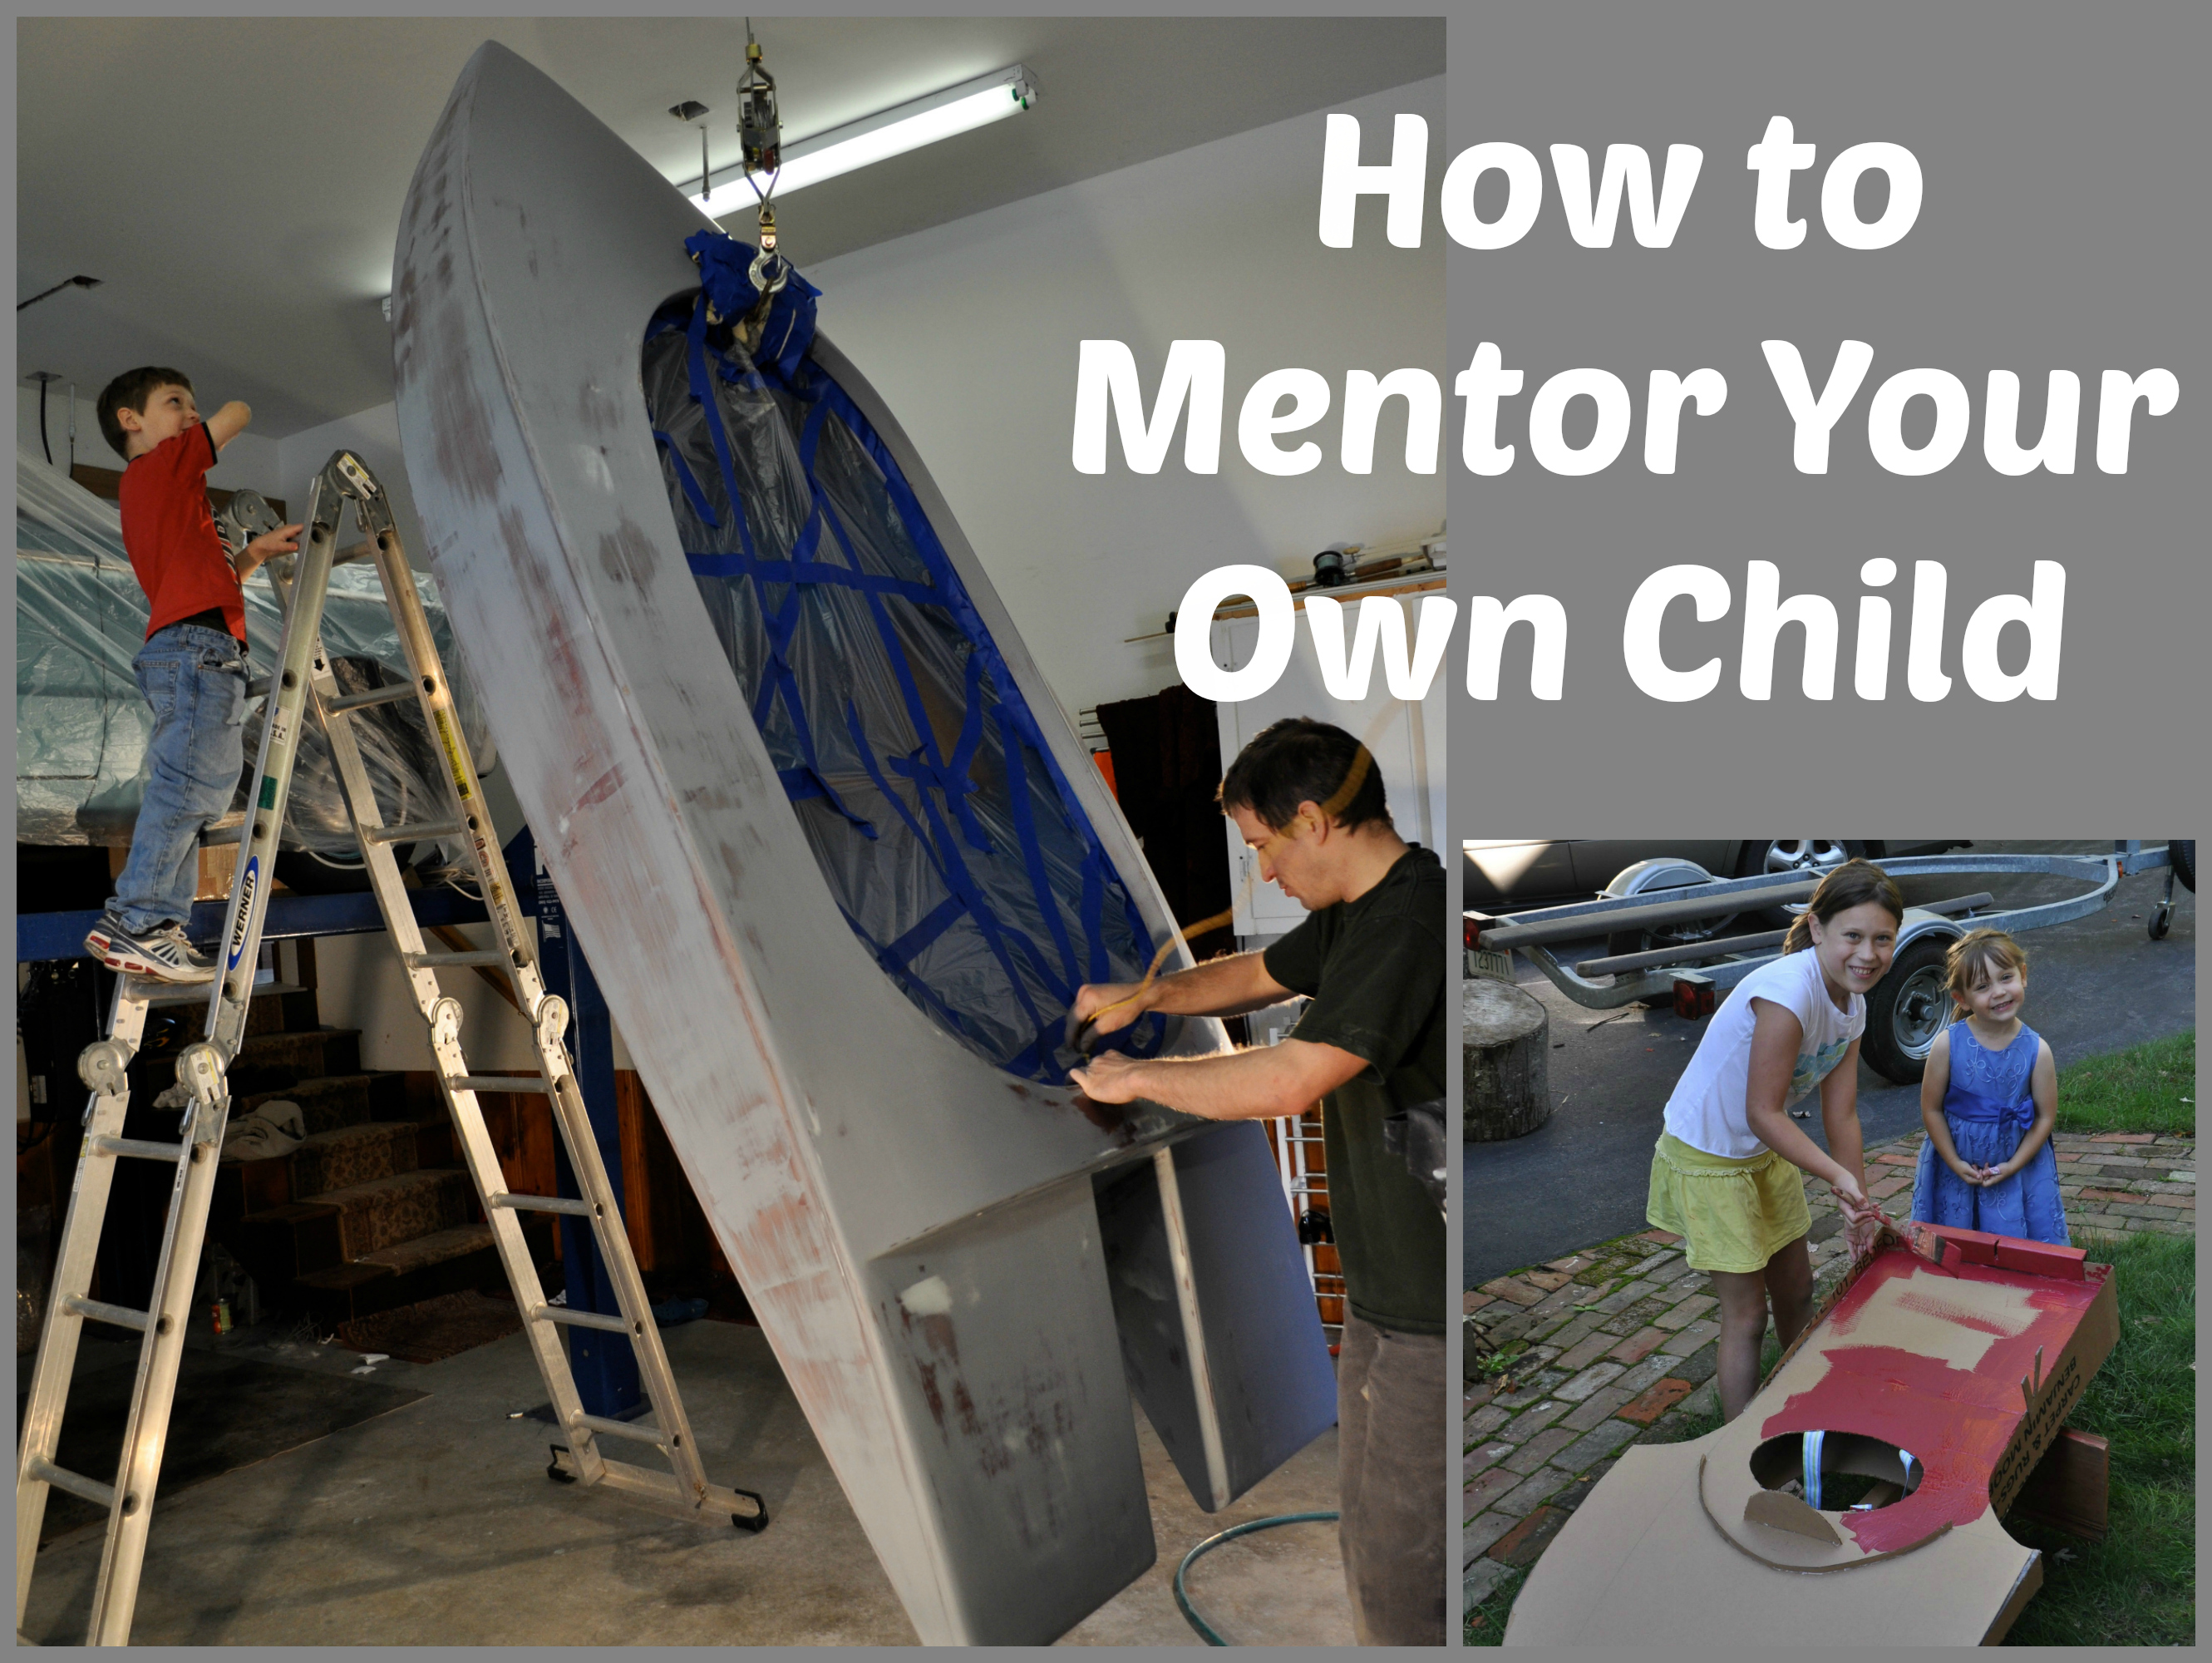 How to Mentor Your Own Child